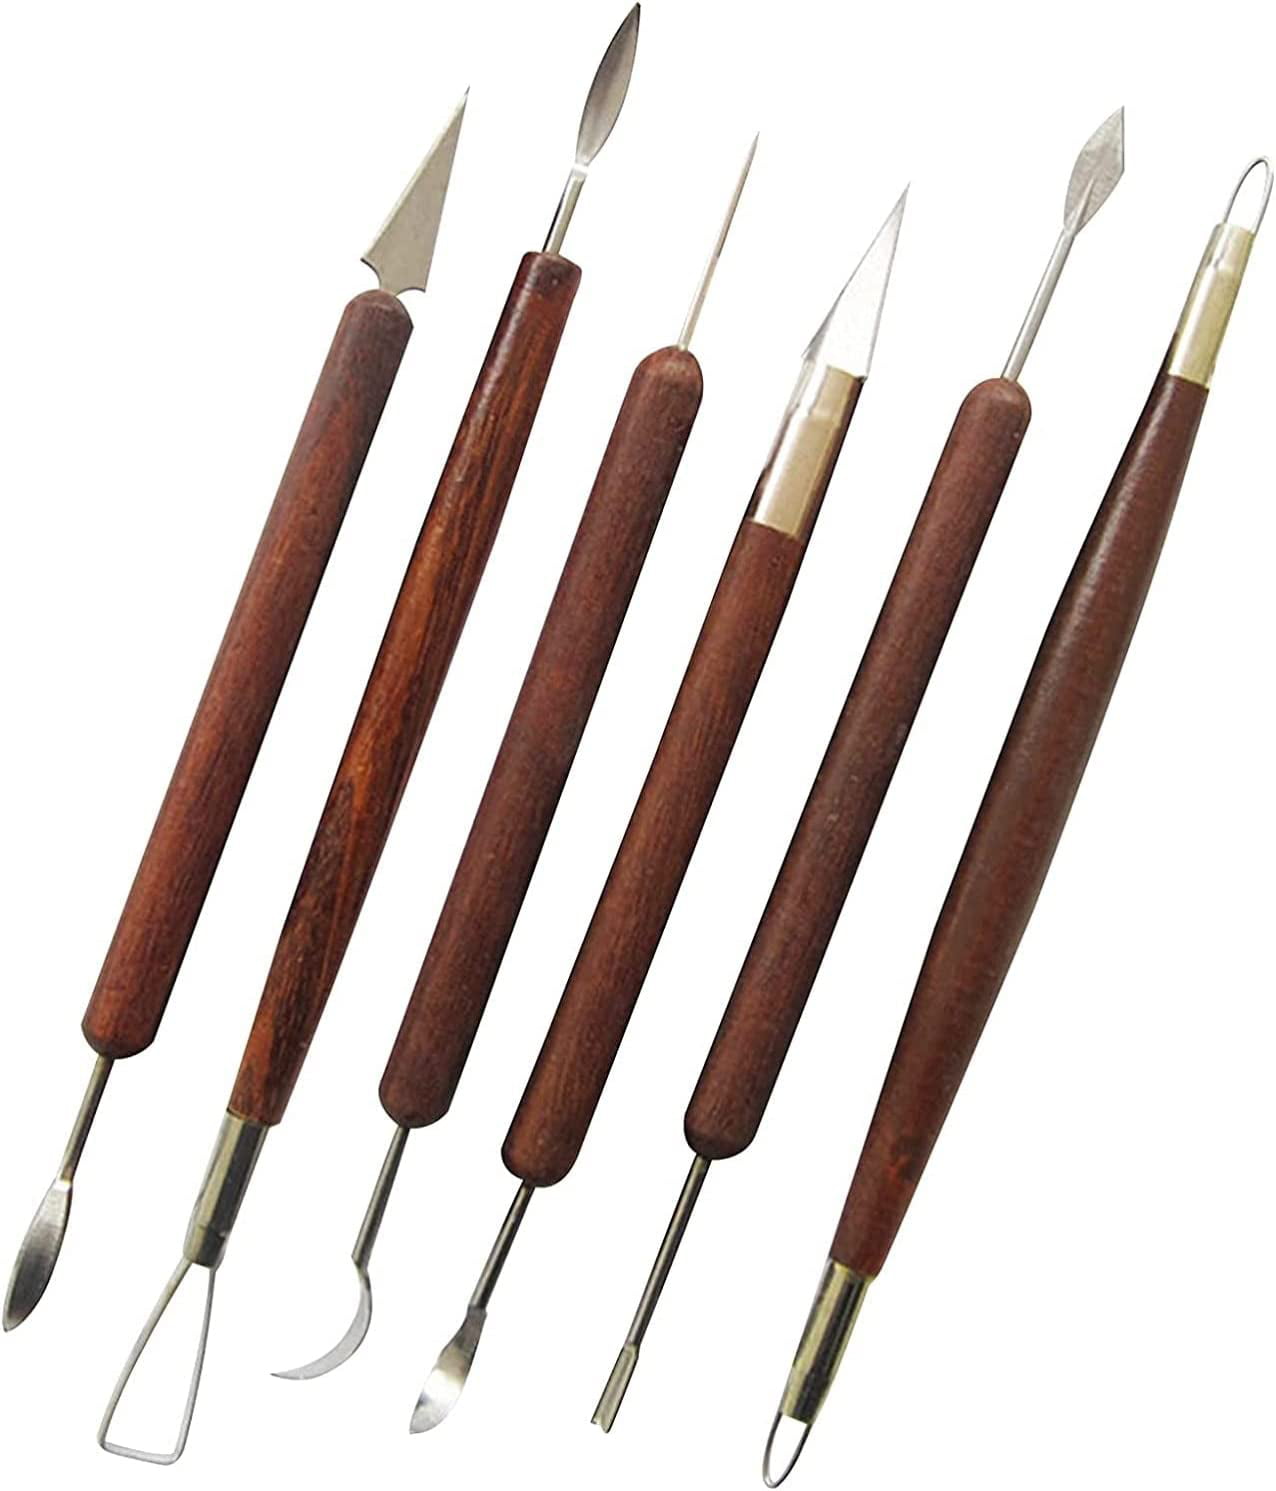 6 Pcs Clay Sculpting Tools Wax Carvers Tools Double-Ended Stainless Steel Wax Clay Sculpting Carving DIY Tools for Professional Art Crafts Clay Pottery Sculpture 